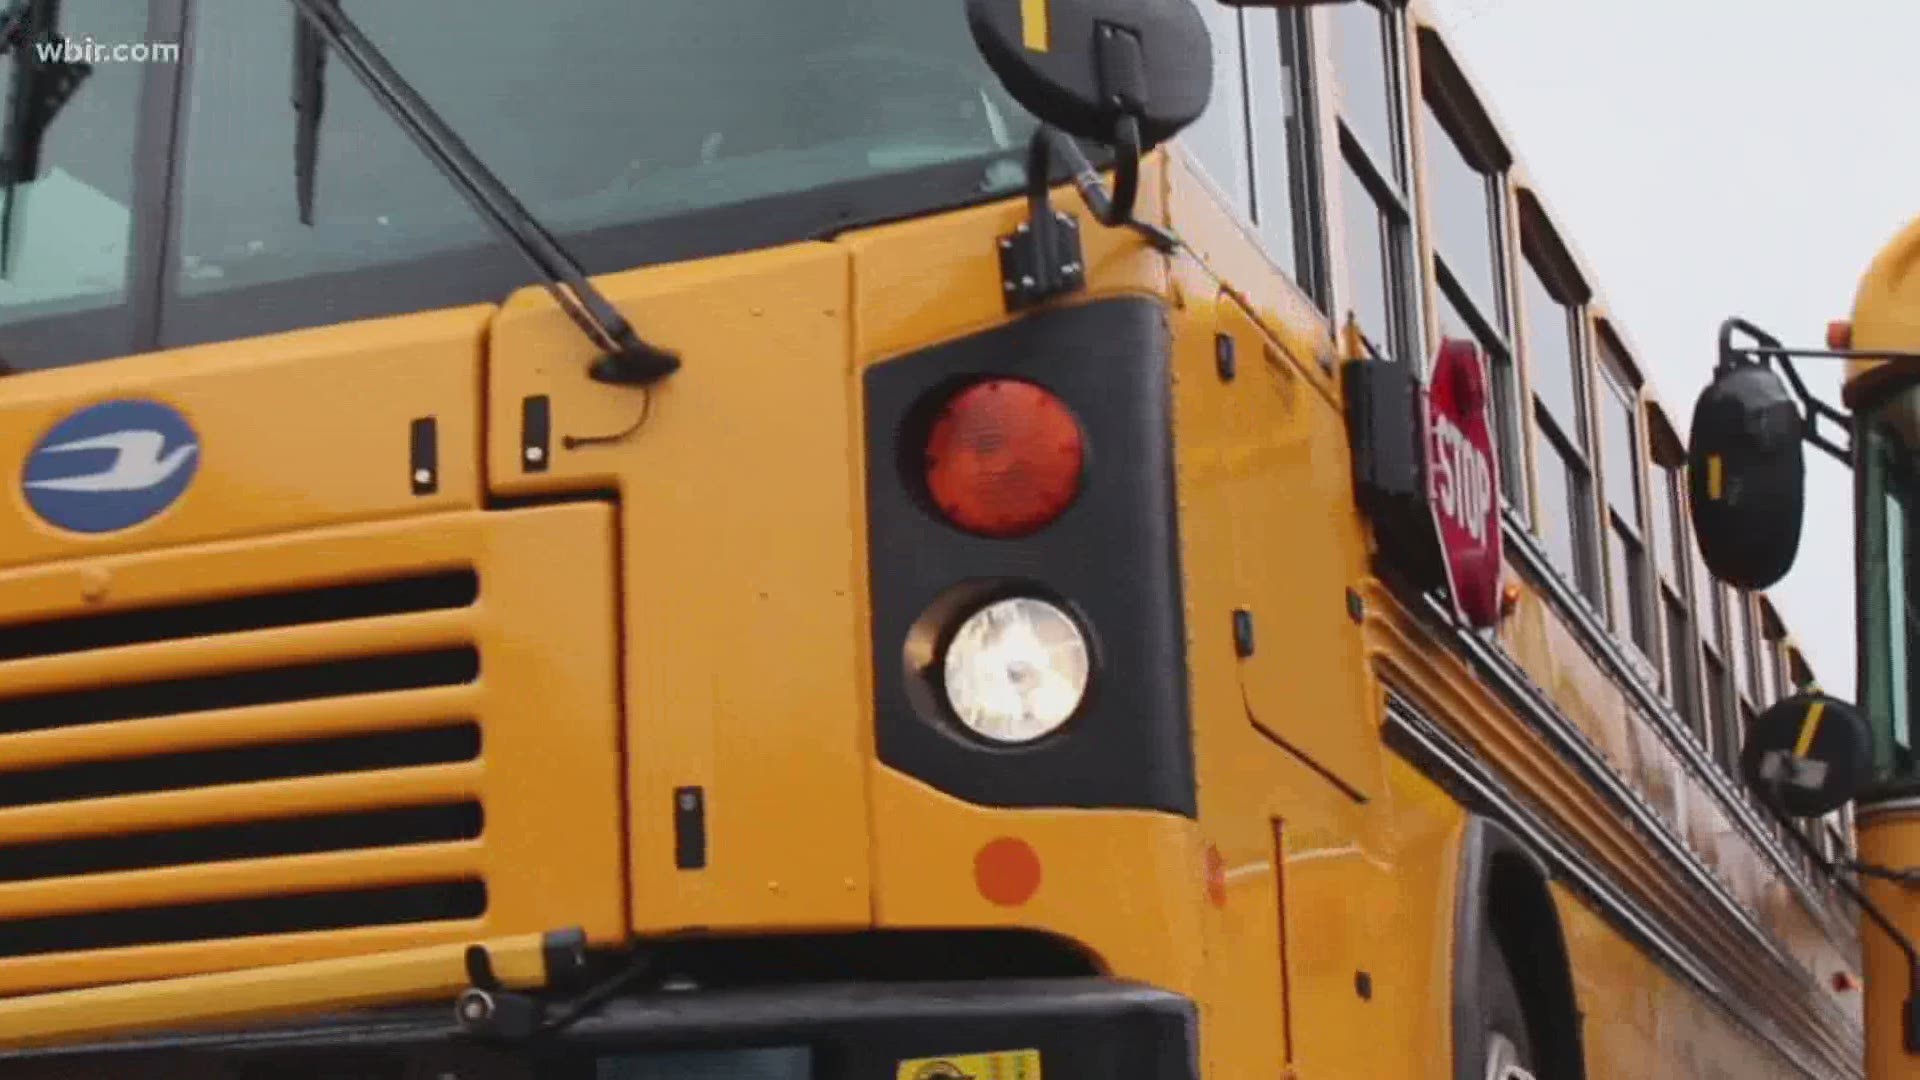 Bus drivers across the country are preparing to keep kids safe on the road and safe from germs this school year. KCS says students and drivers will wear masks.